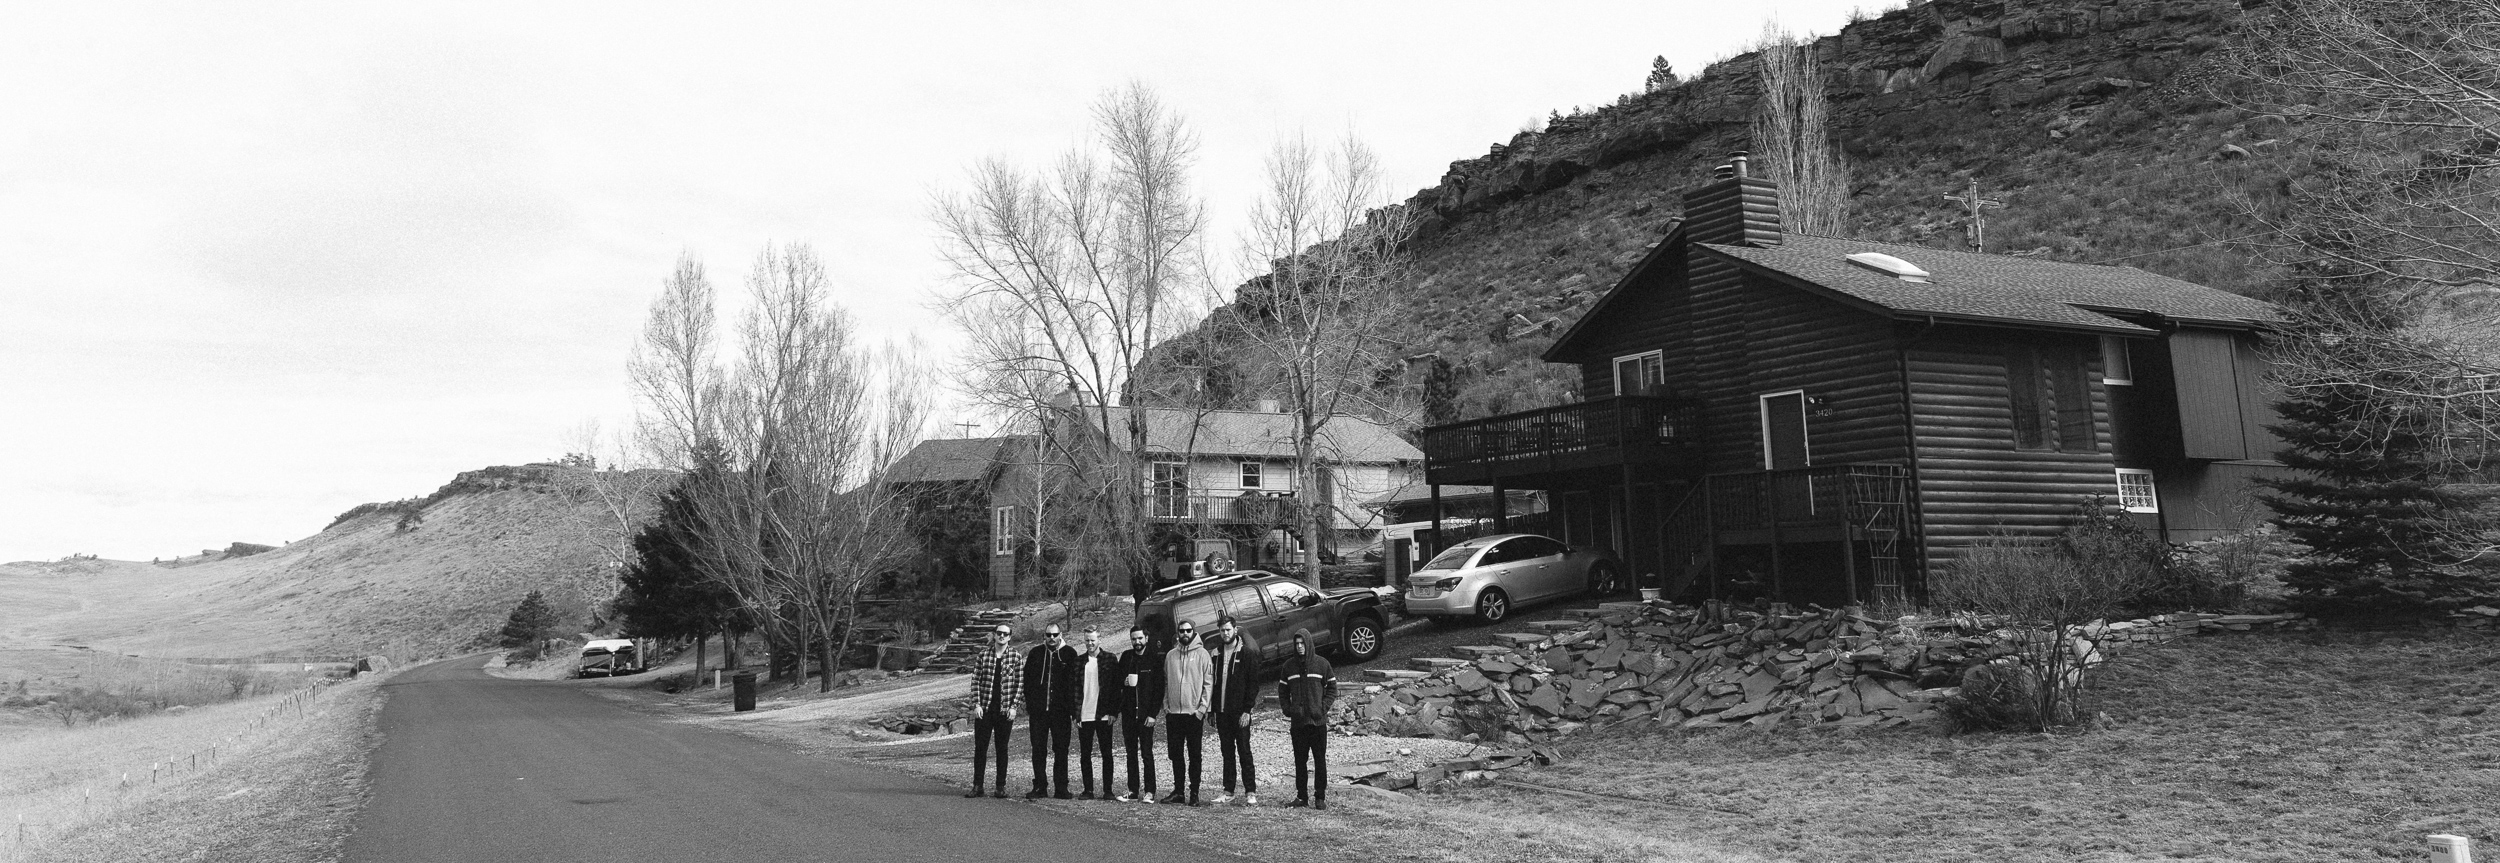 This is the house they lived at while recording - A Day To Remember in Studio